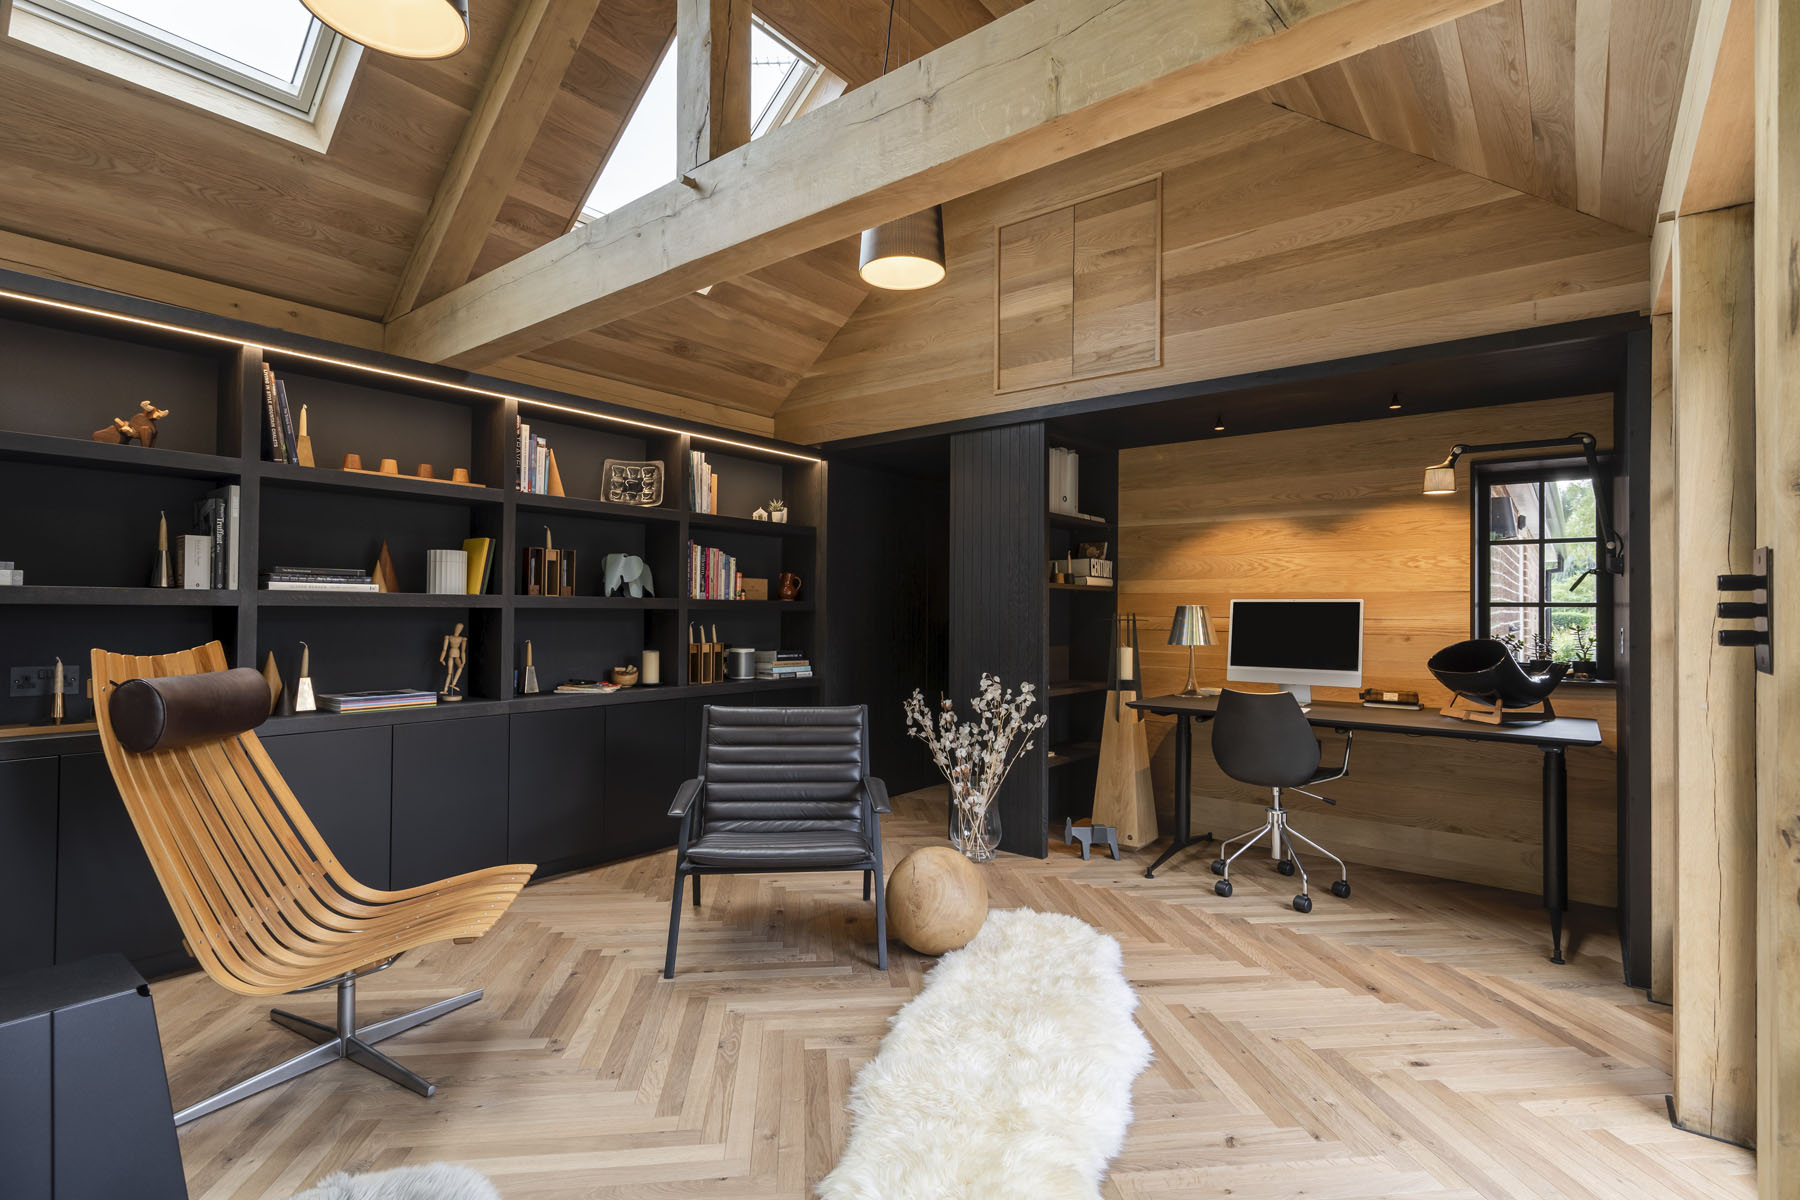 Studio One17, an office in the English countryside